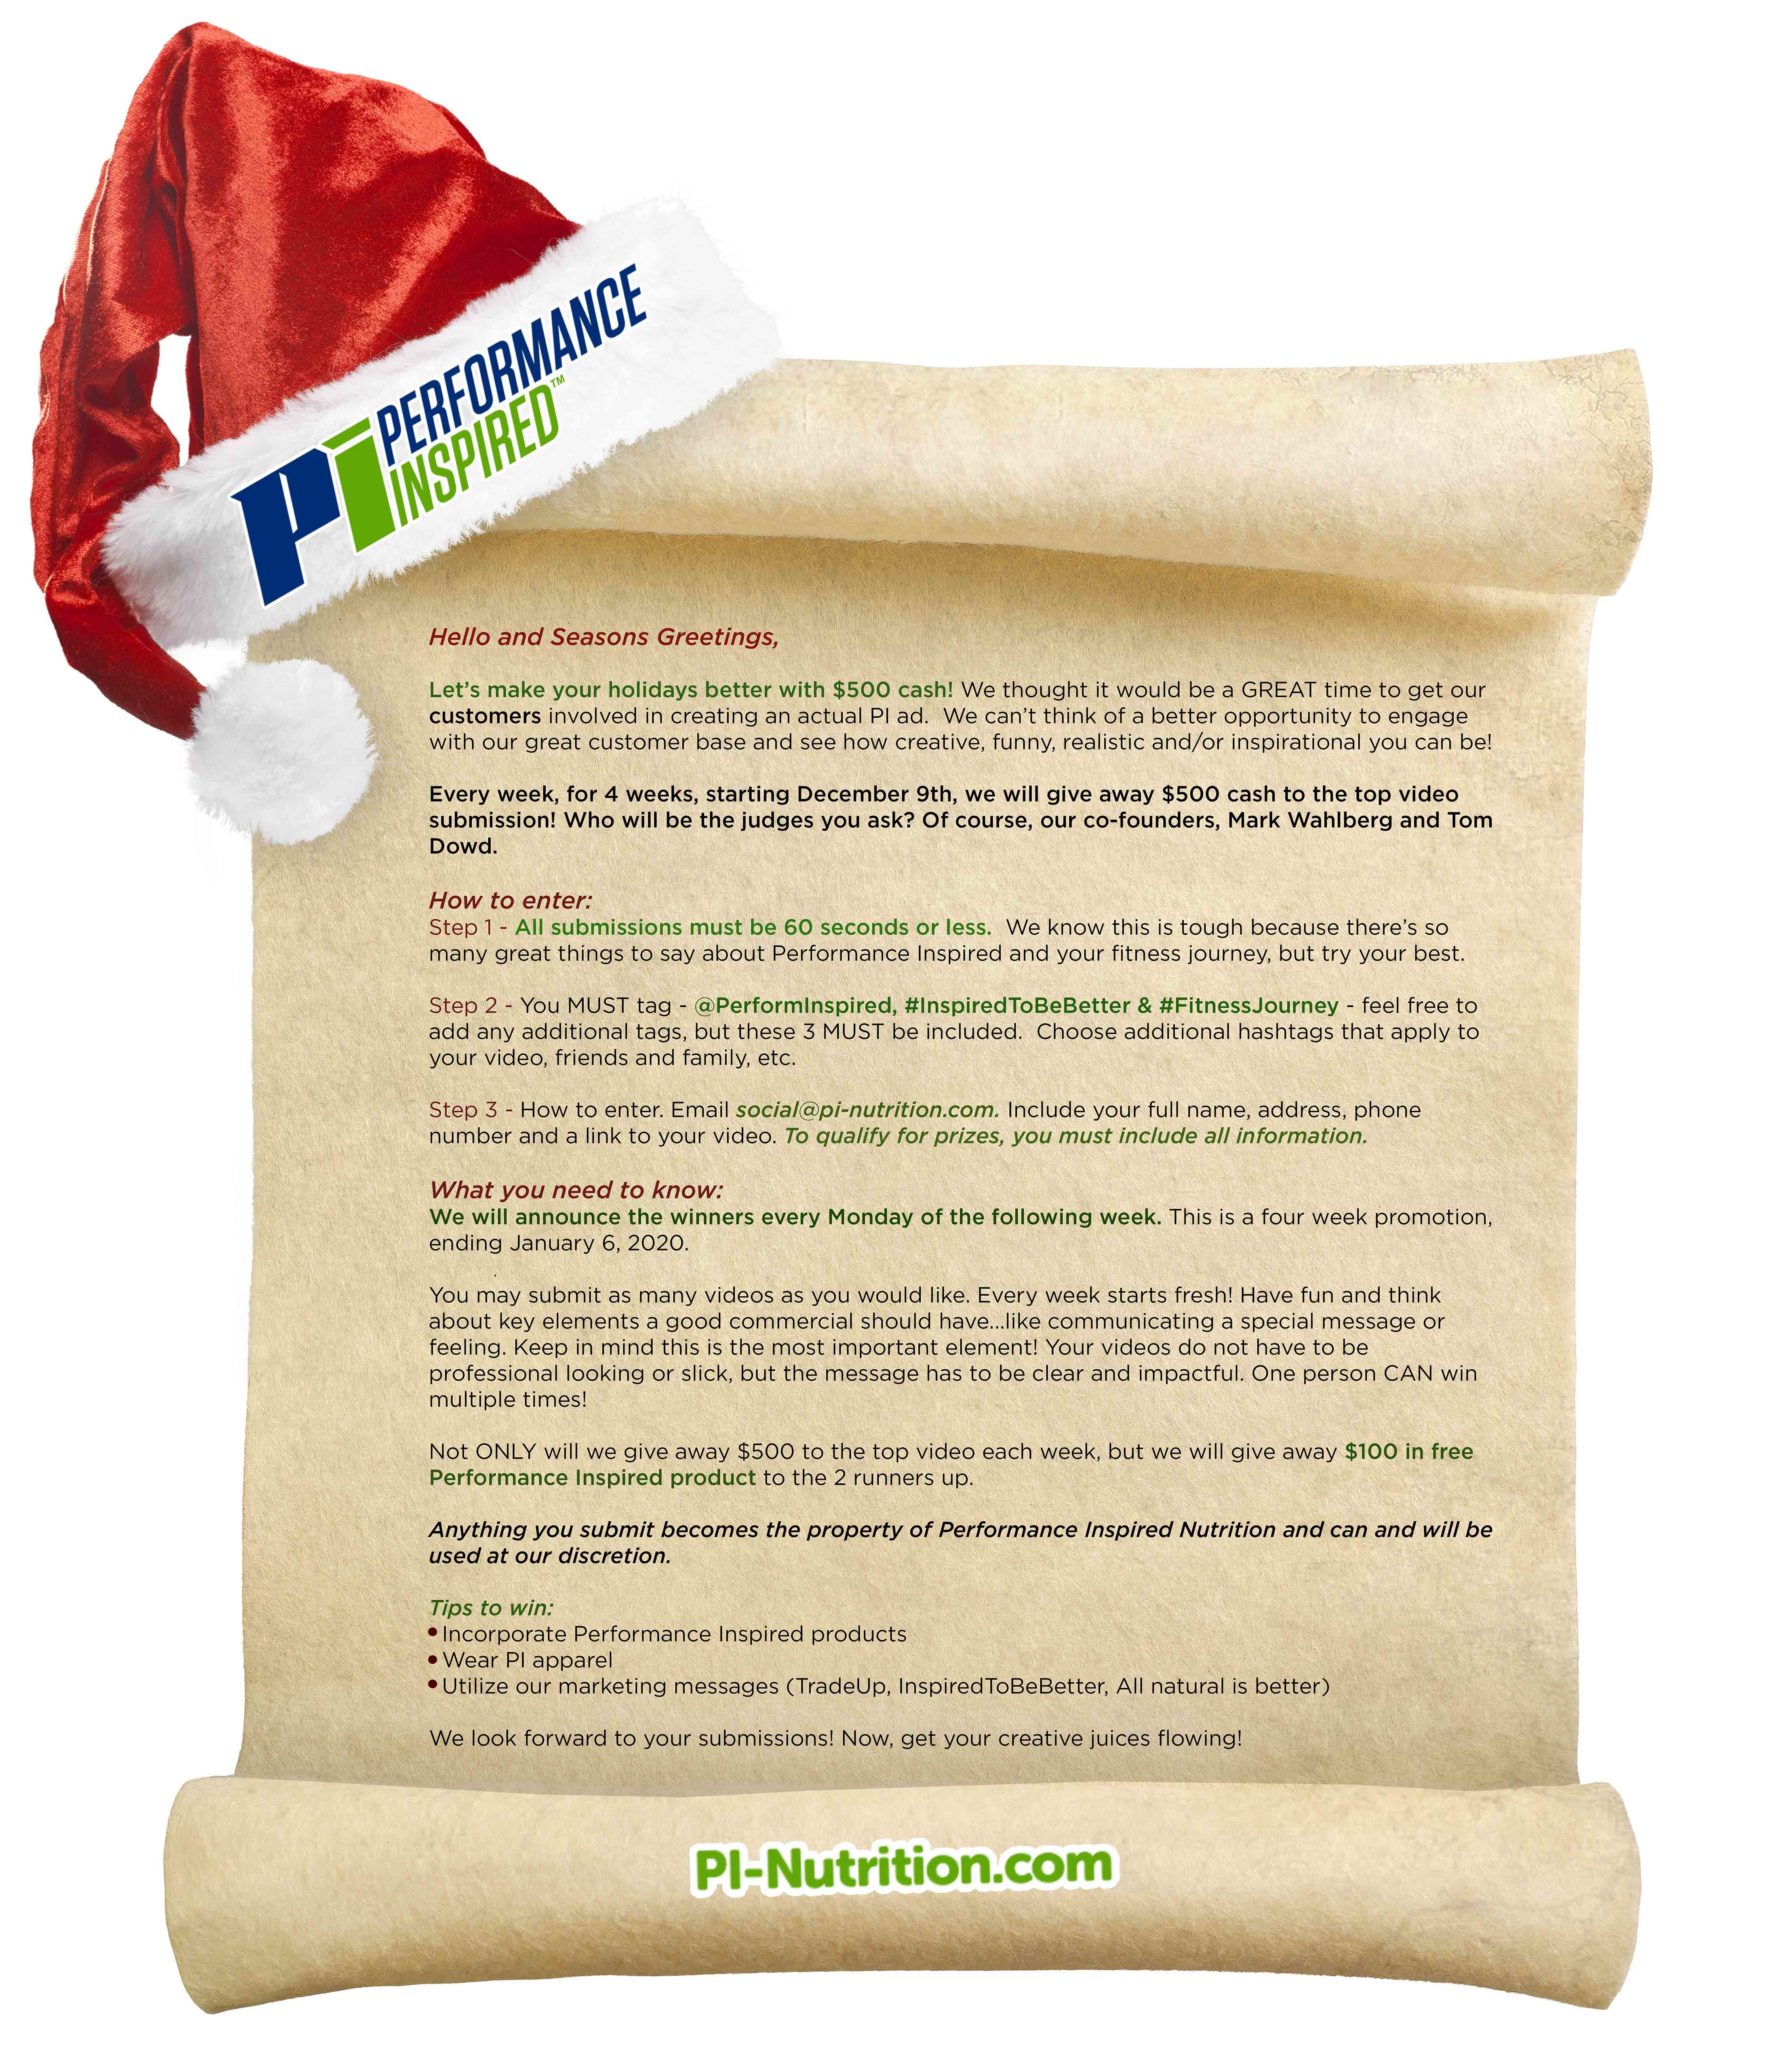 Let's Make Your Holidays Better - Performance Inspired Nutrition